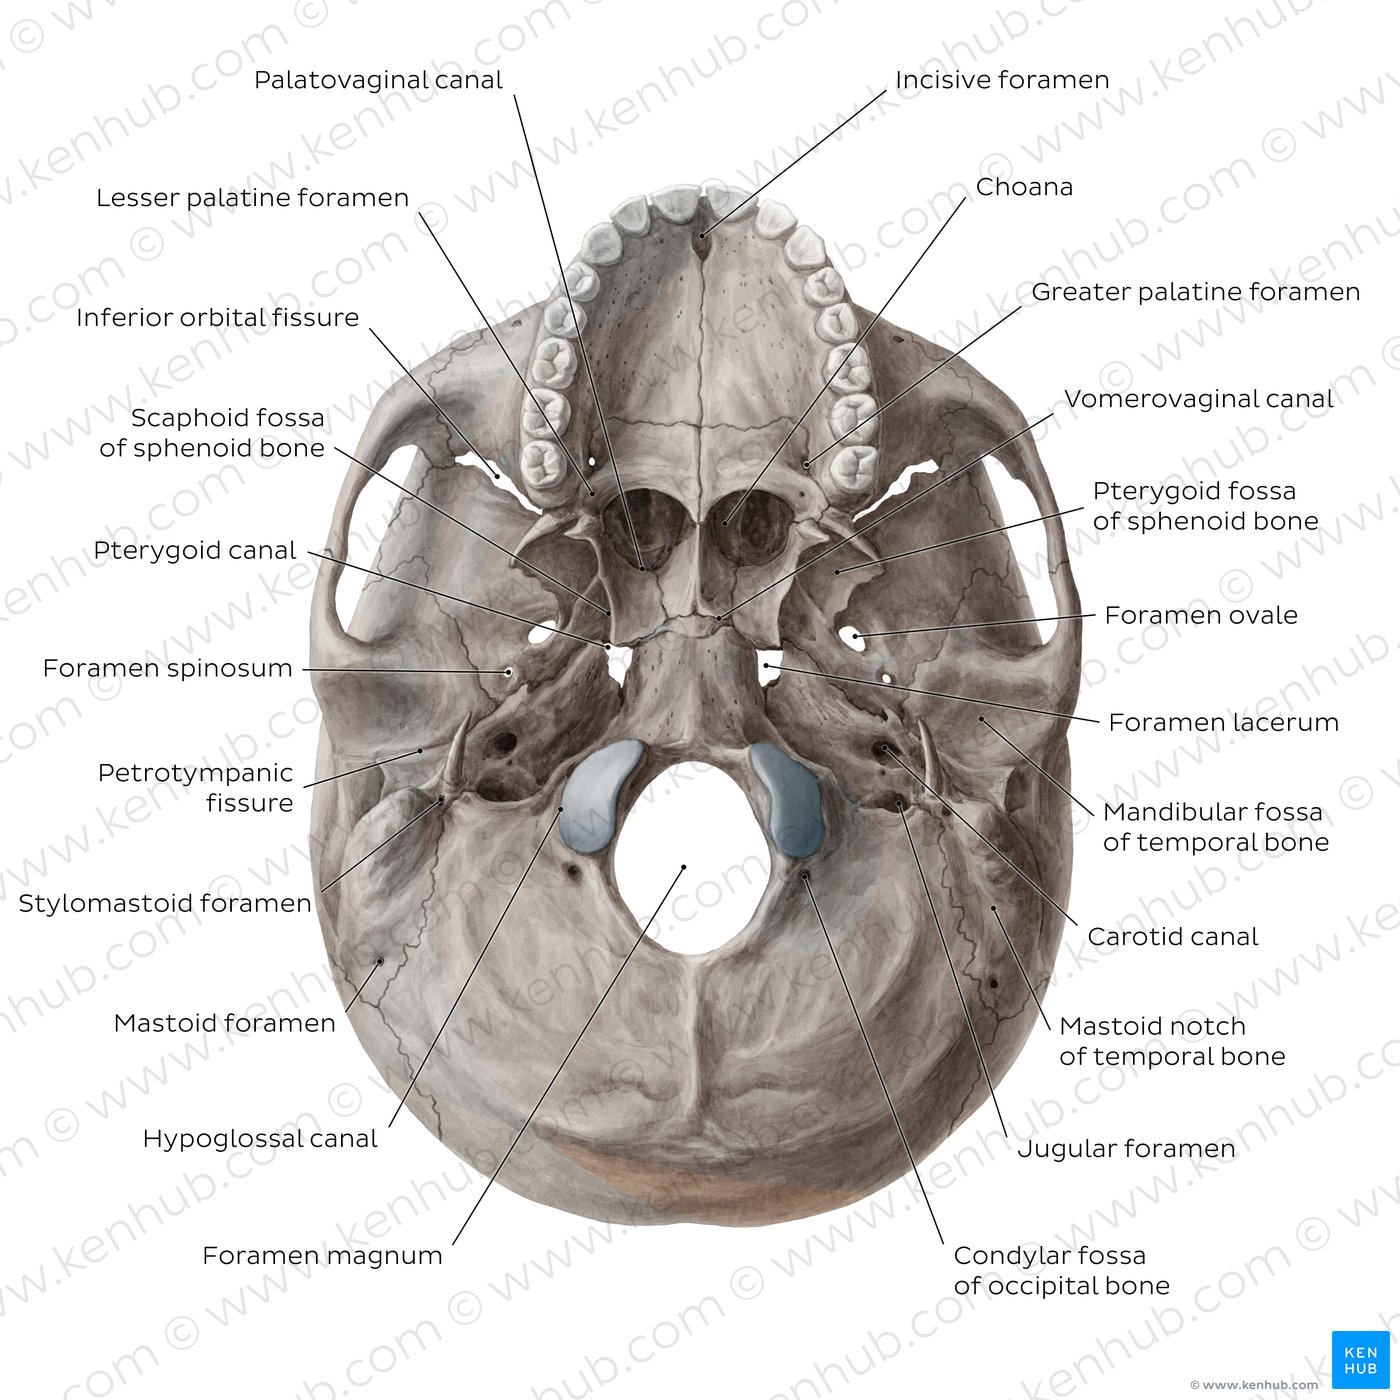 Inferior base of the skull - Foramina, fissures, and canals